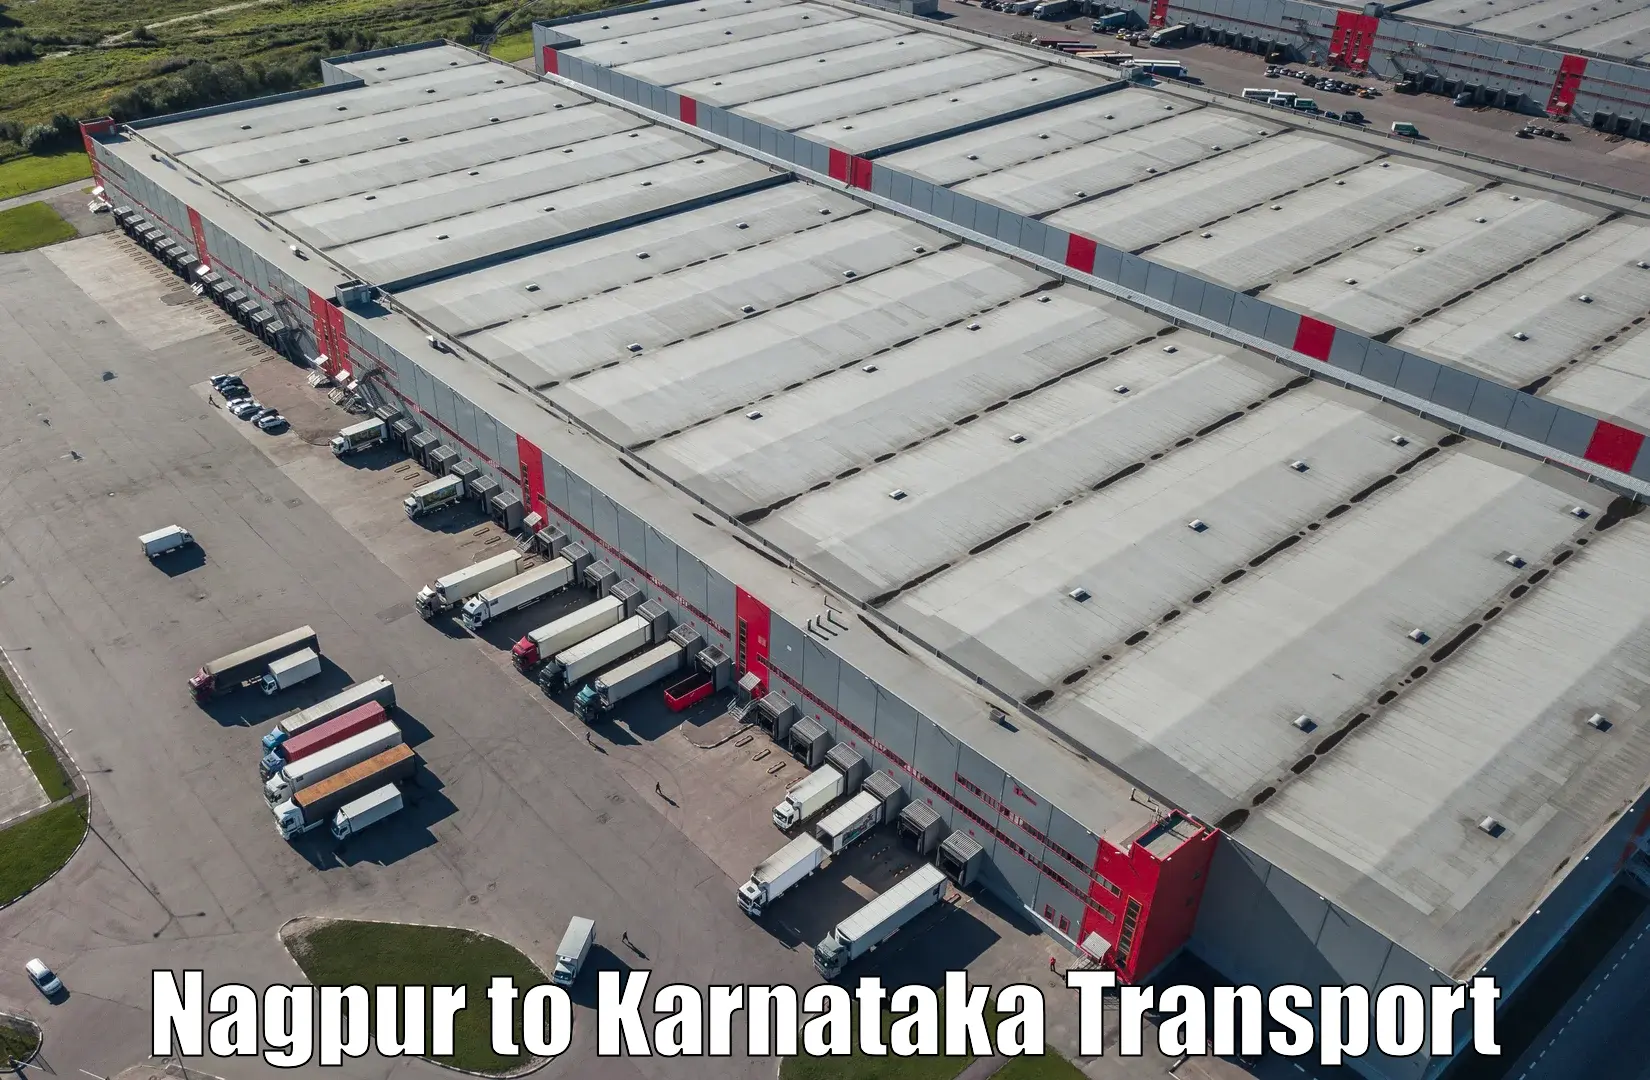 Road transport online services Nagpur to Kollegal